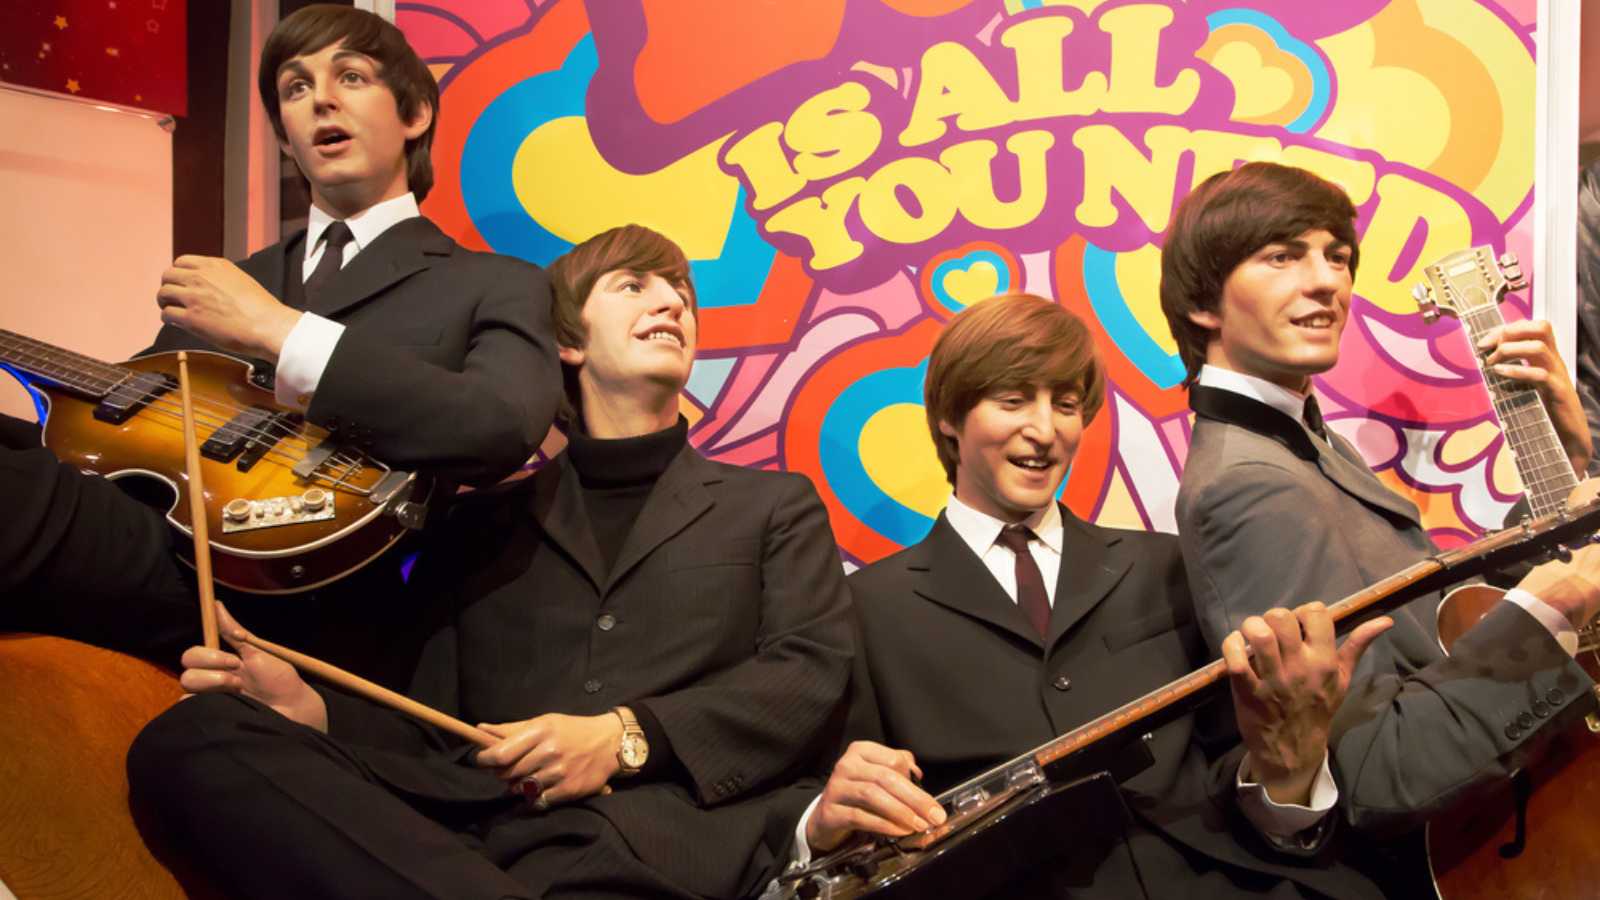 London, United Kingdom - May 25, 2016: The Beatles in Madame Tussauds of London